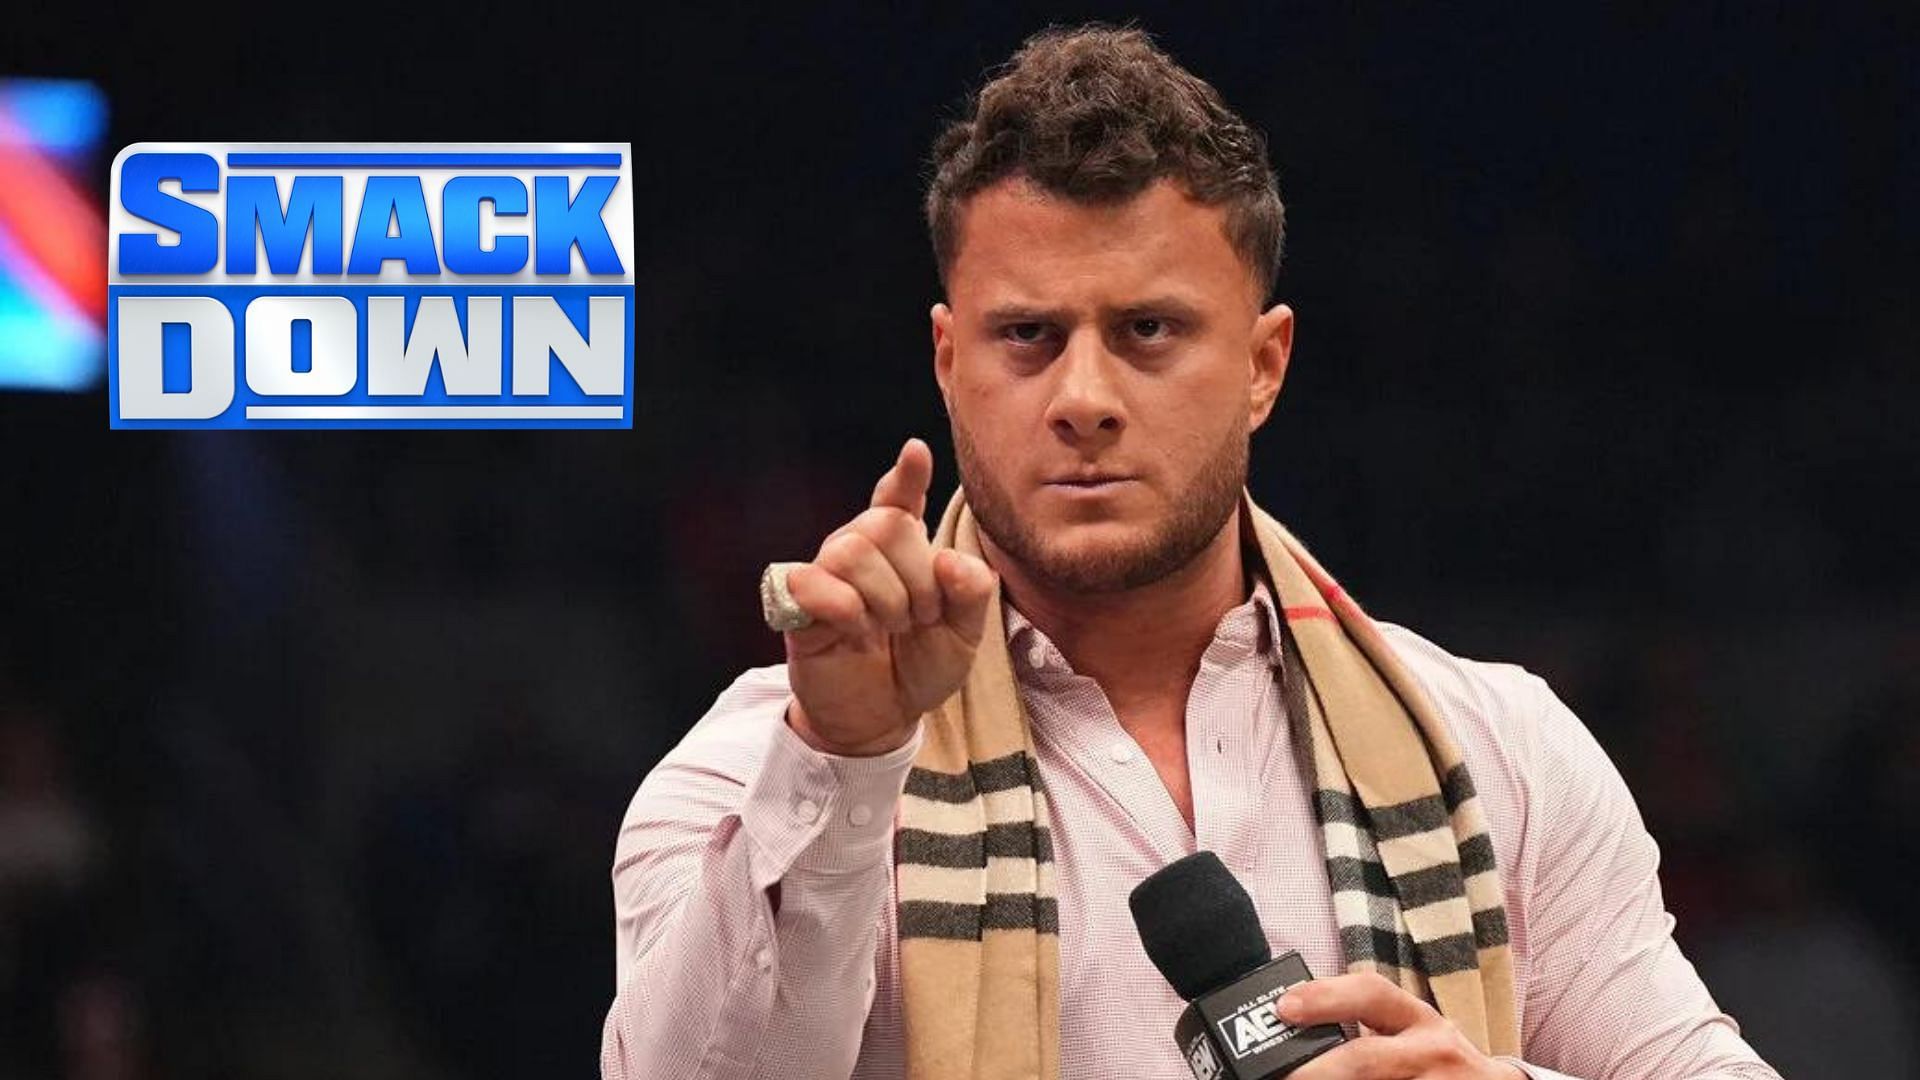 MJF is the current AEW World Champion